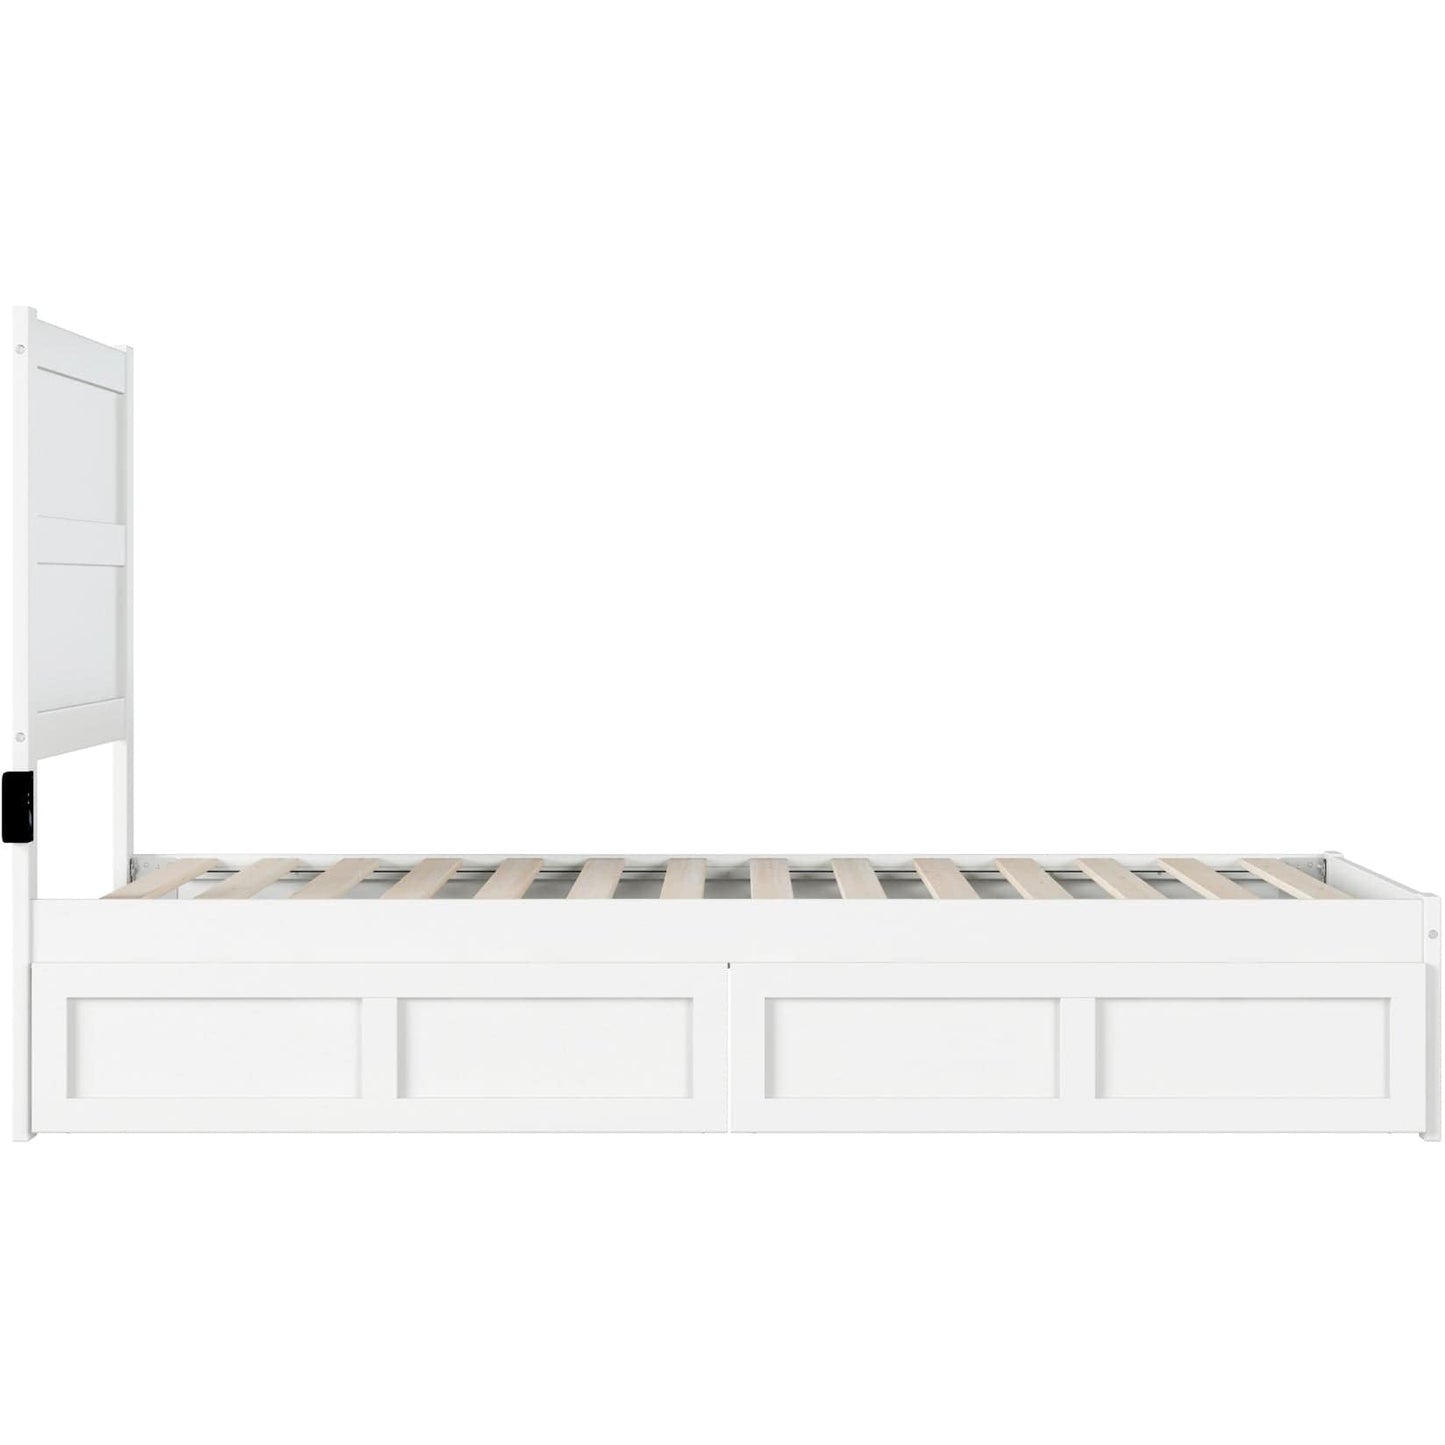 AFI Furnishings NoHo Twin Extra Long Bed with 2 Drawers in White AG9113412